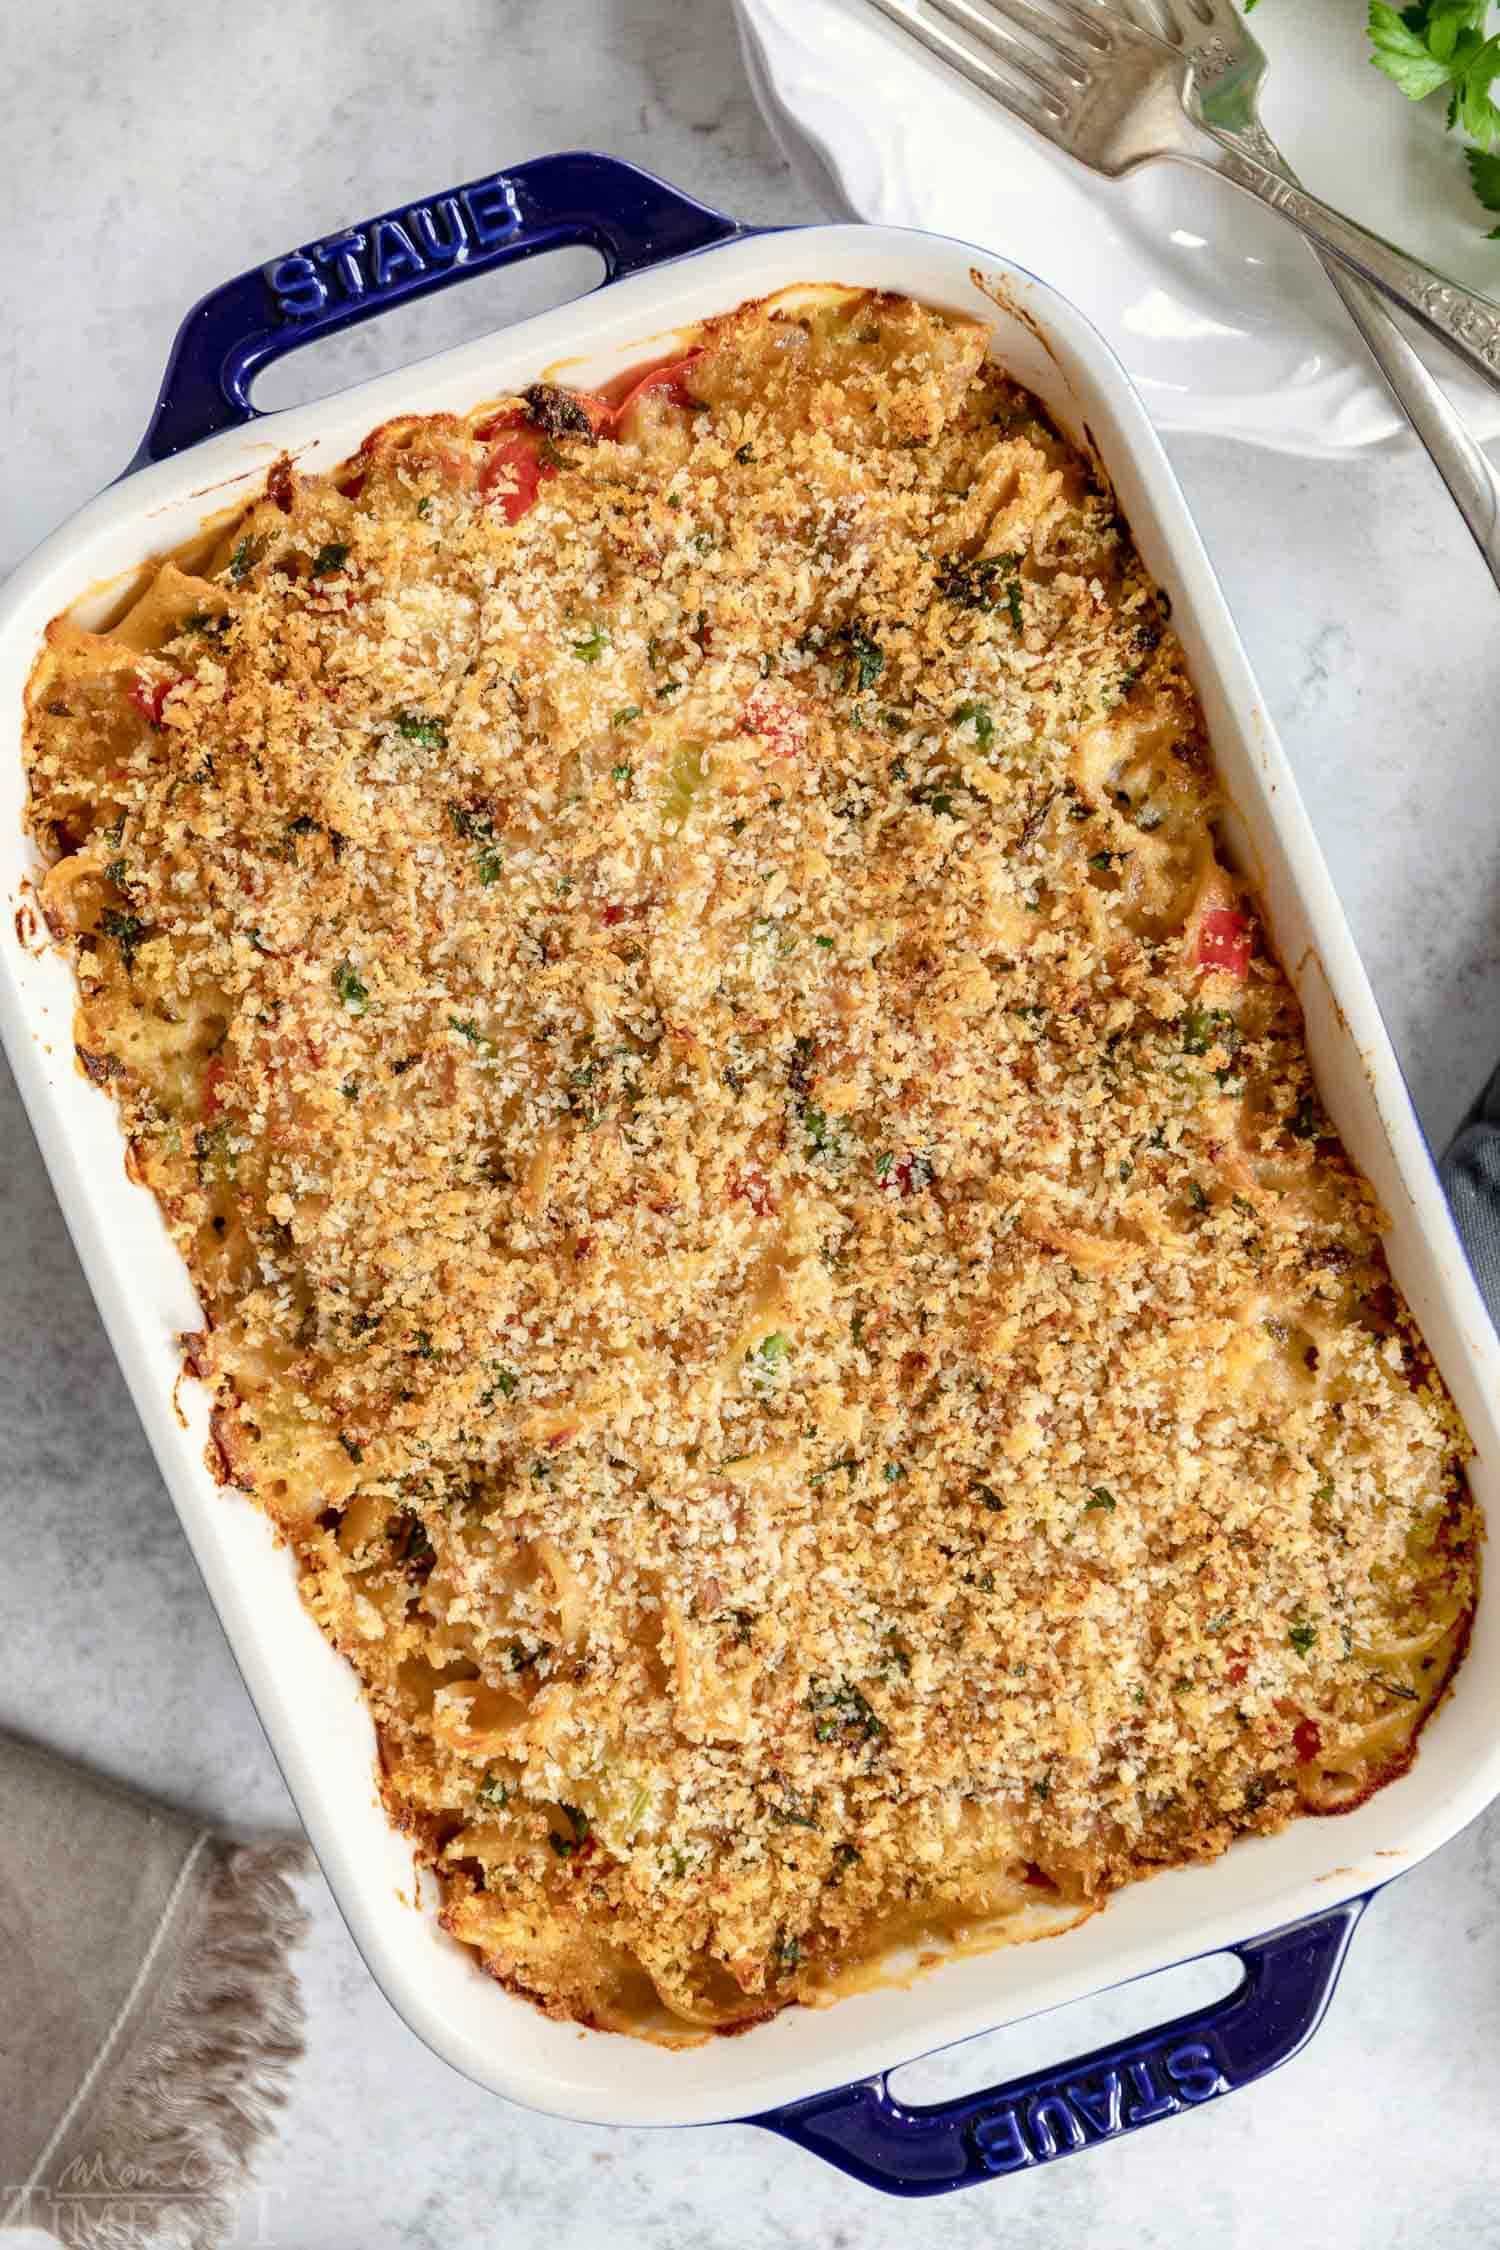 tuna-casserole-recipe-with-noodles-baking-dish-baked